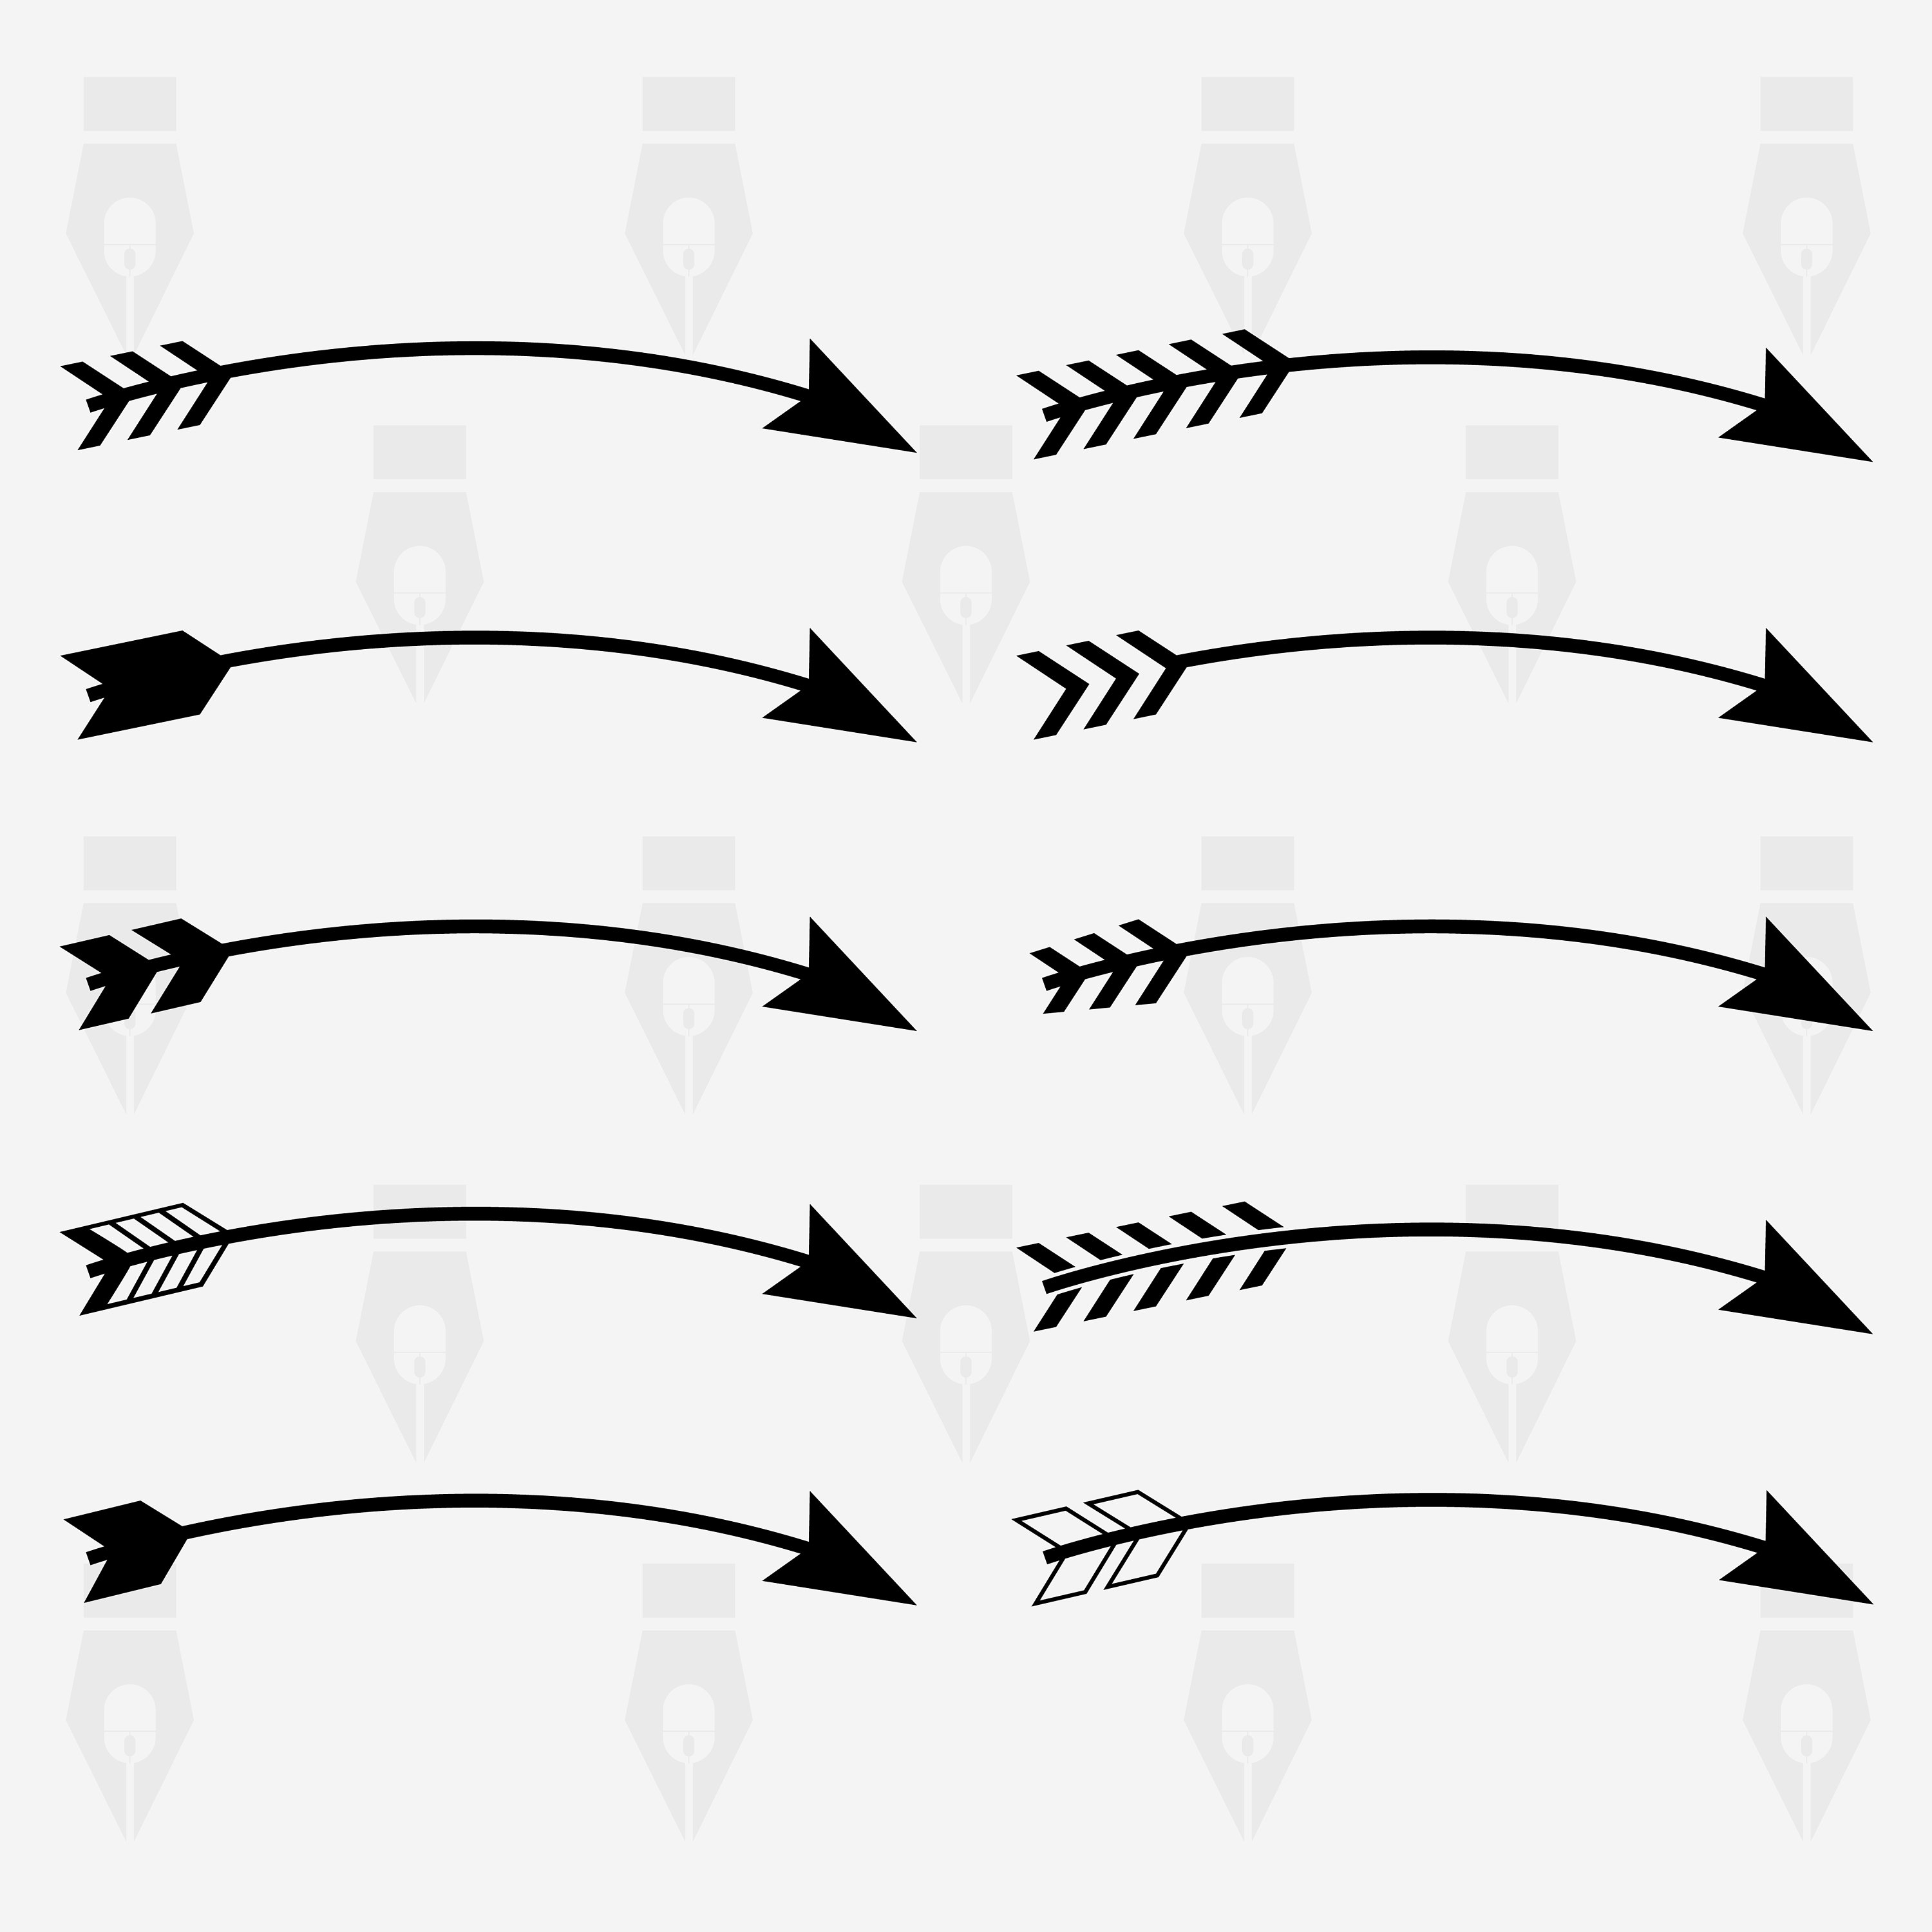 Curved Arrow svg, Curved Arrow digital clipart files for Design, Printing,  Cutting or more. Instant files included svg, png, dxf.